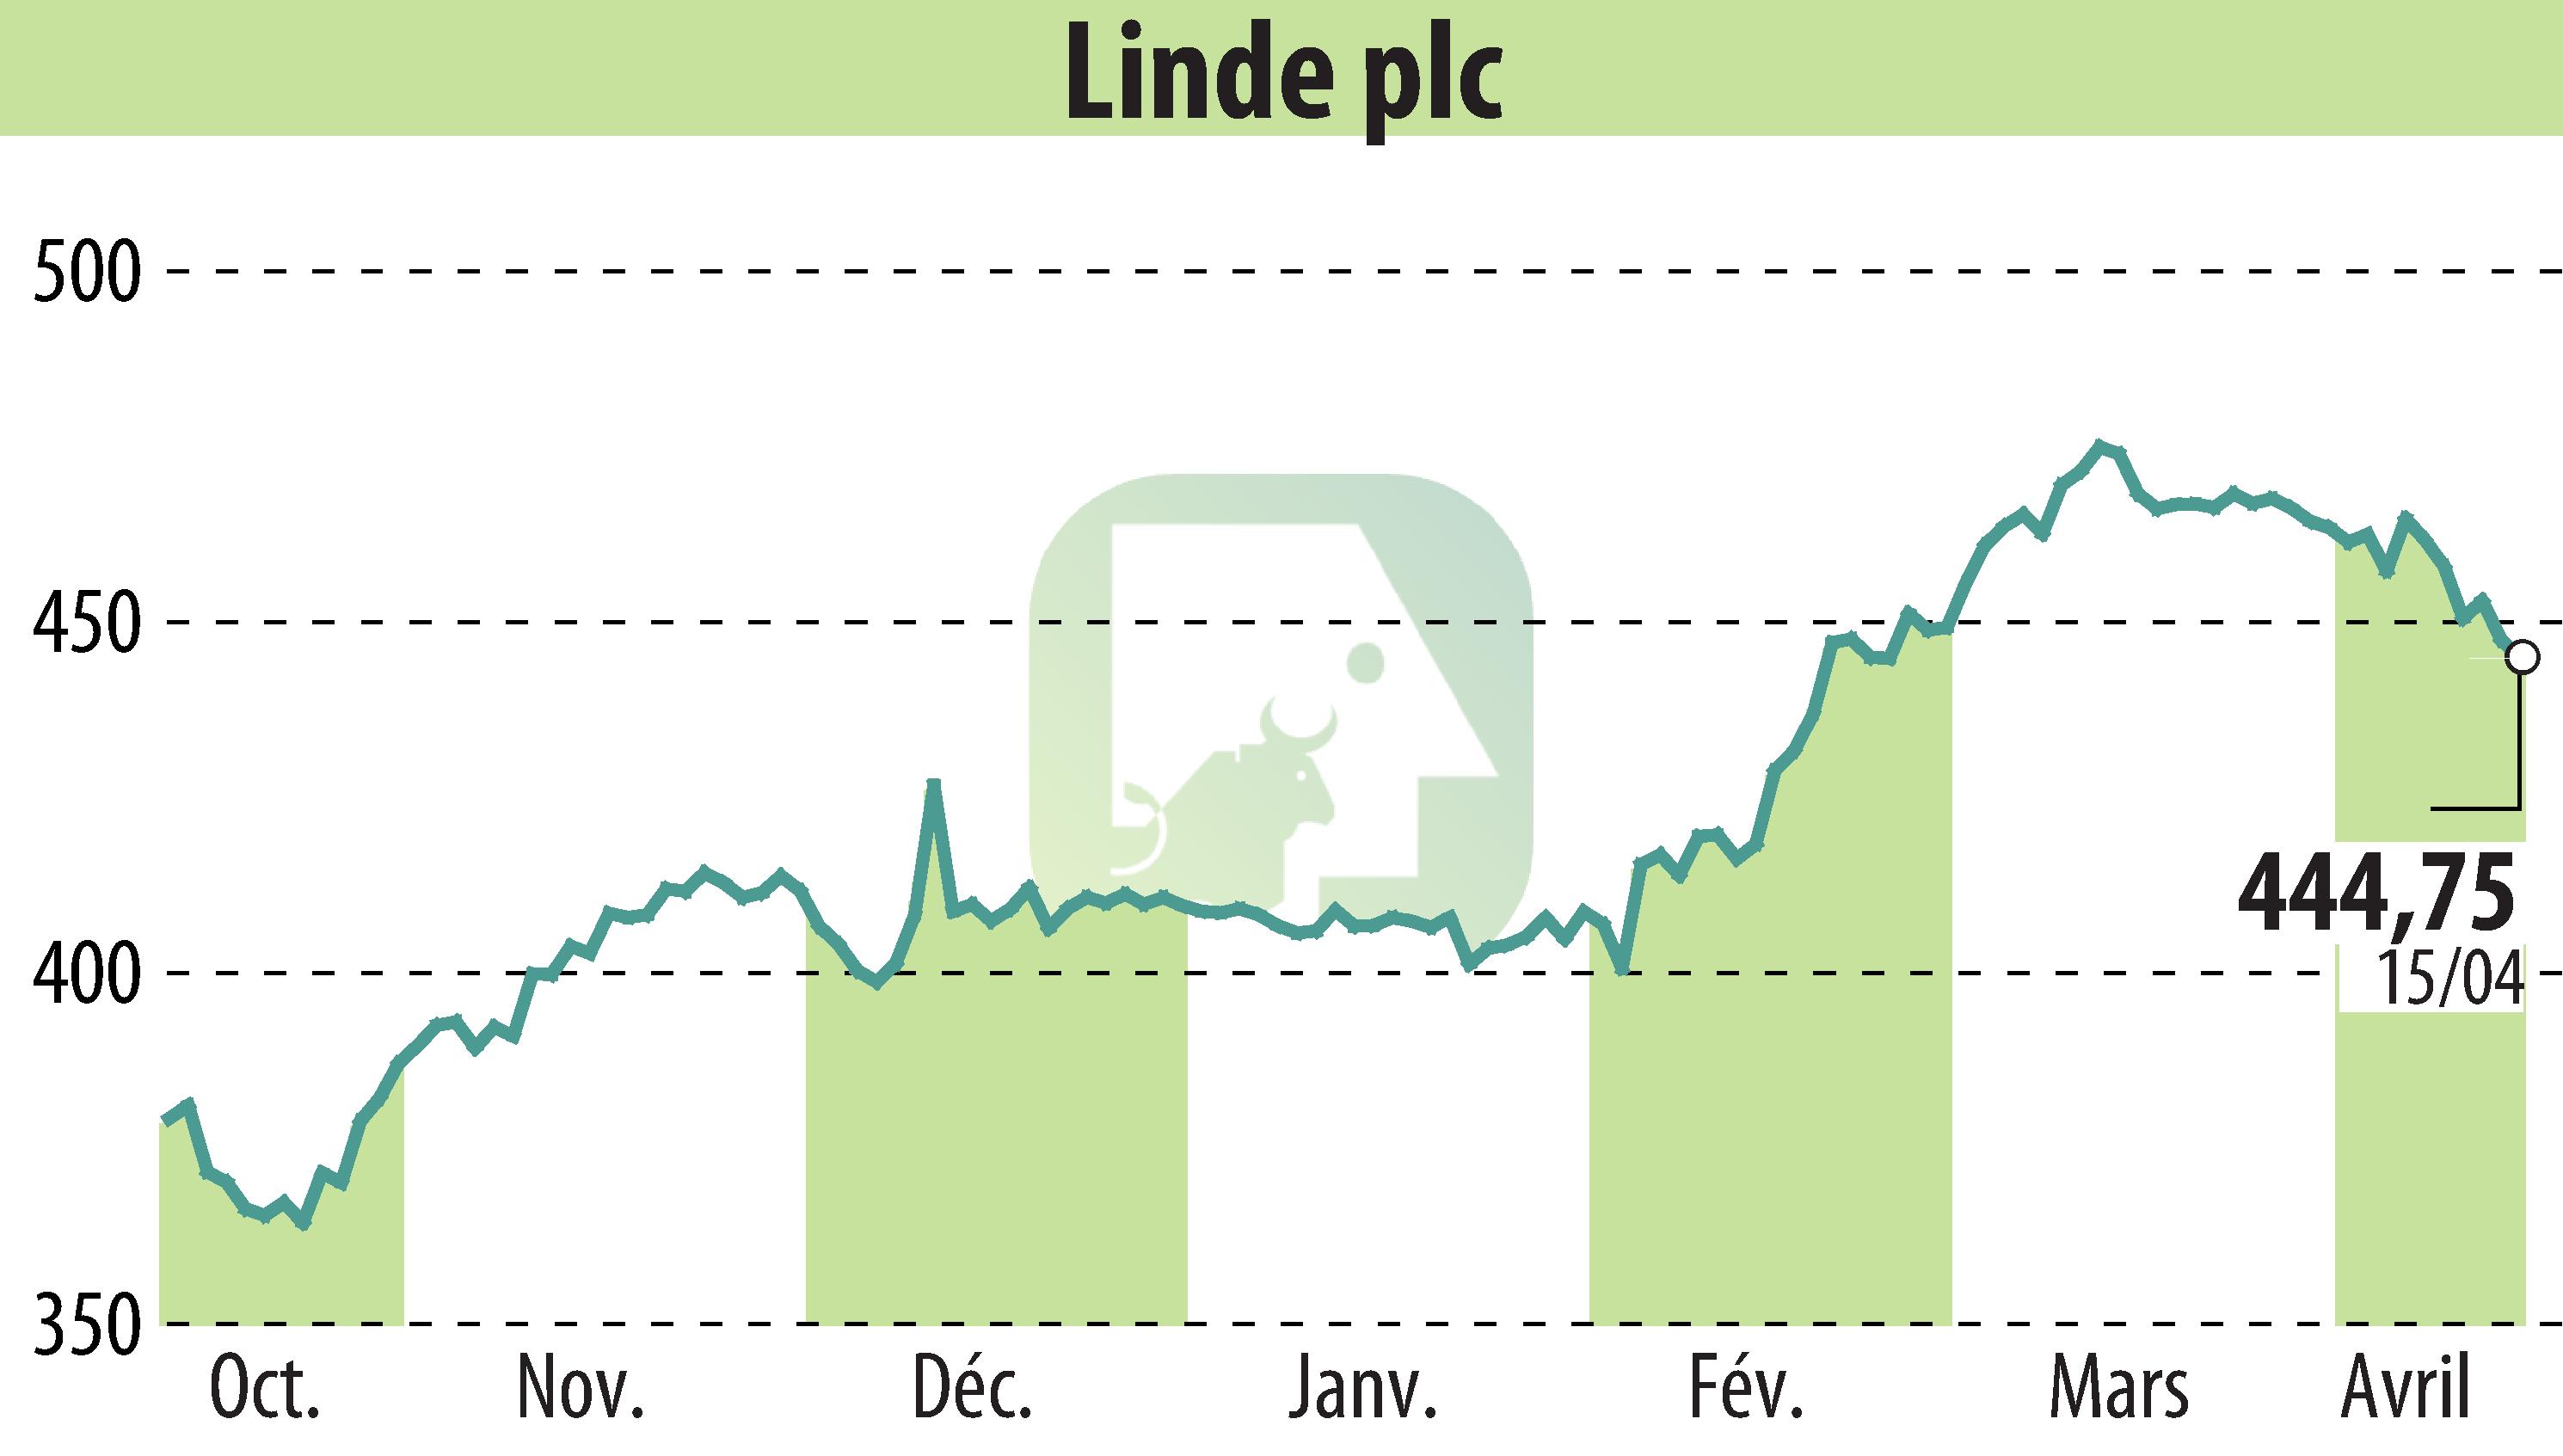 Stock price chart of Linde Plc (EBR:LIN) showing fluctuations.